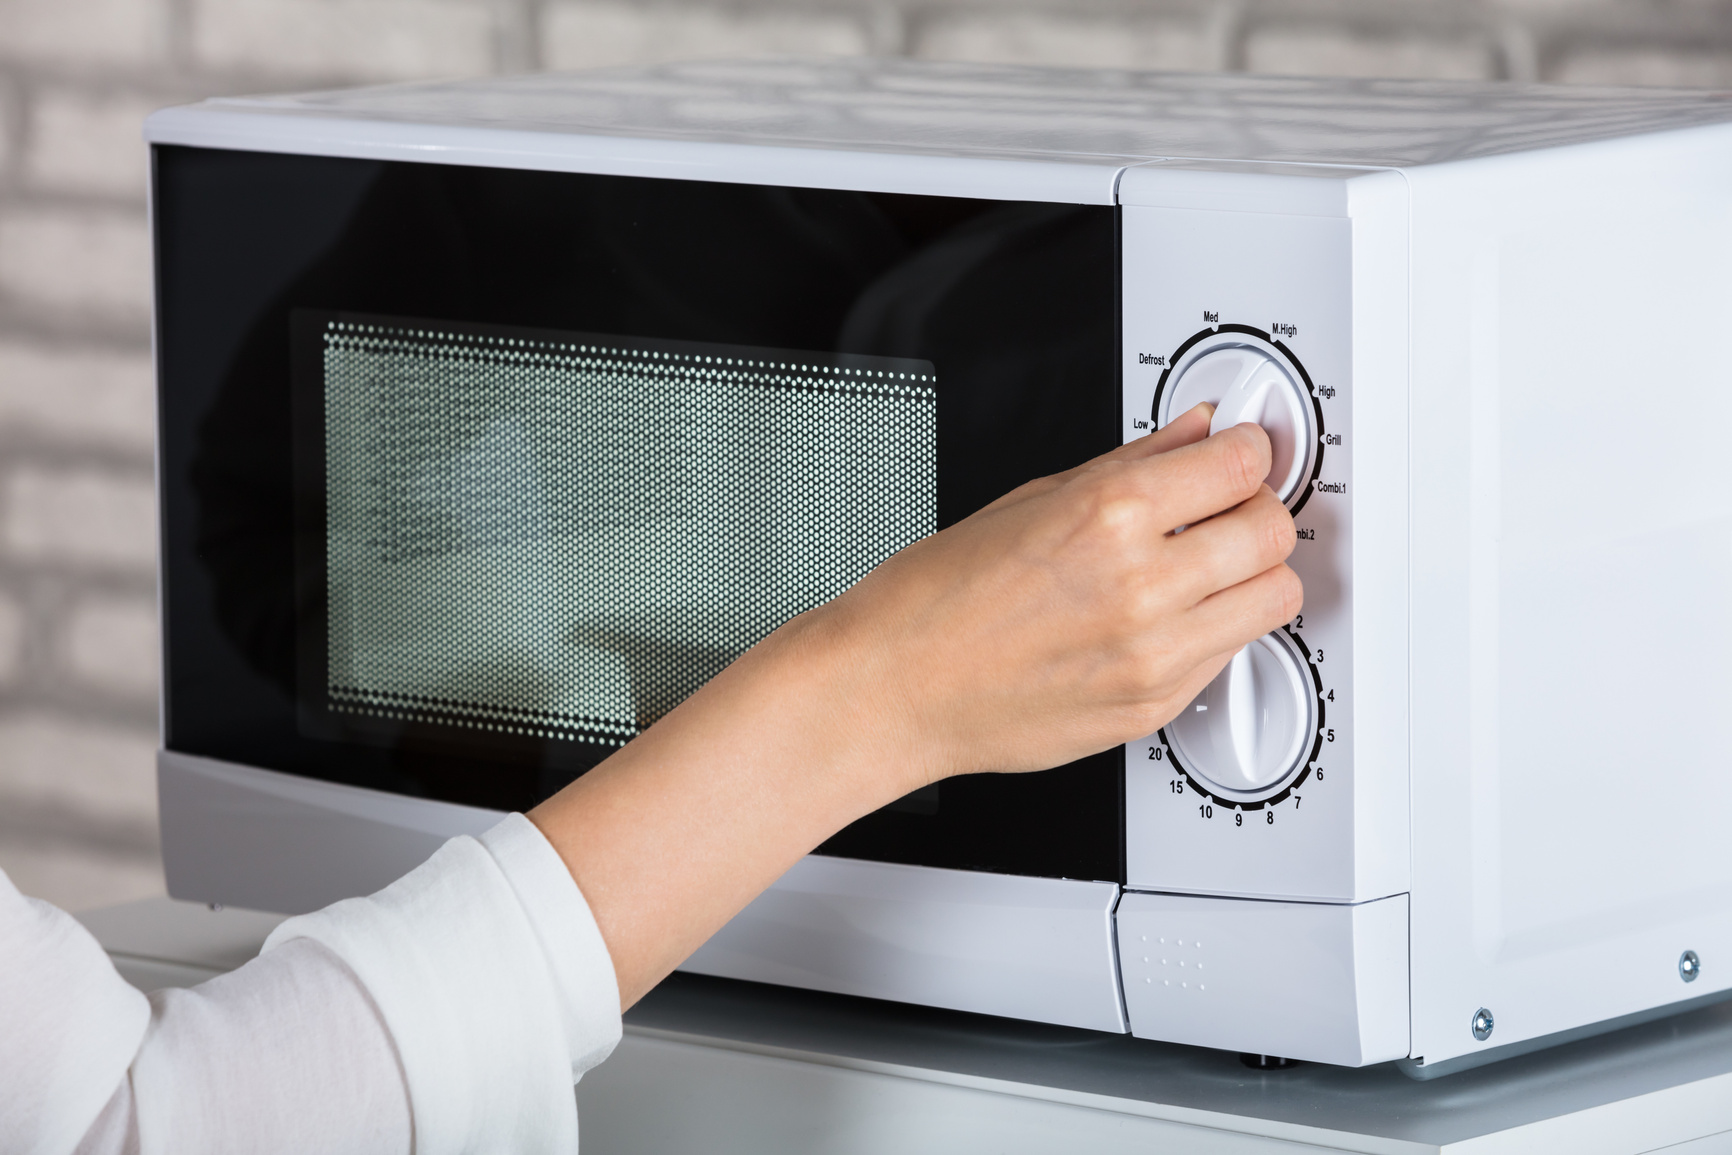 Woman Using Microwave Oven